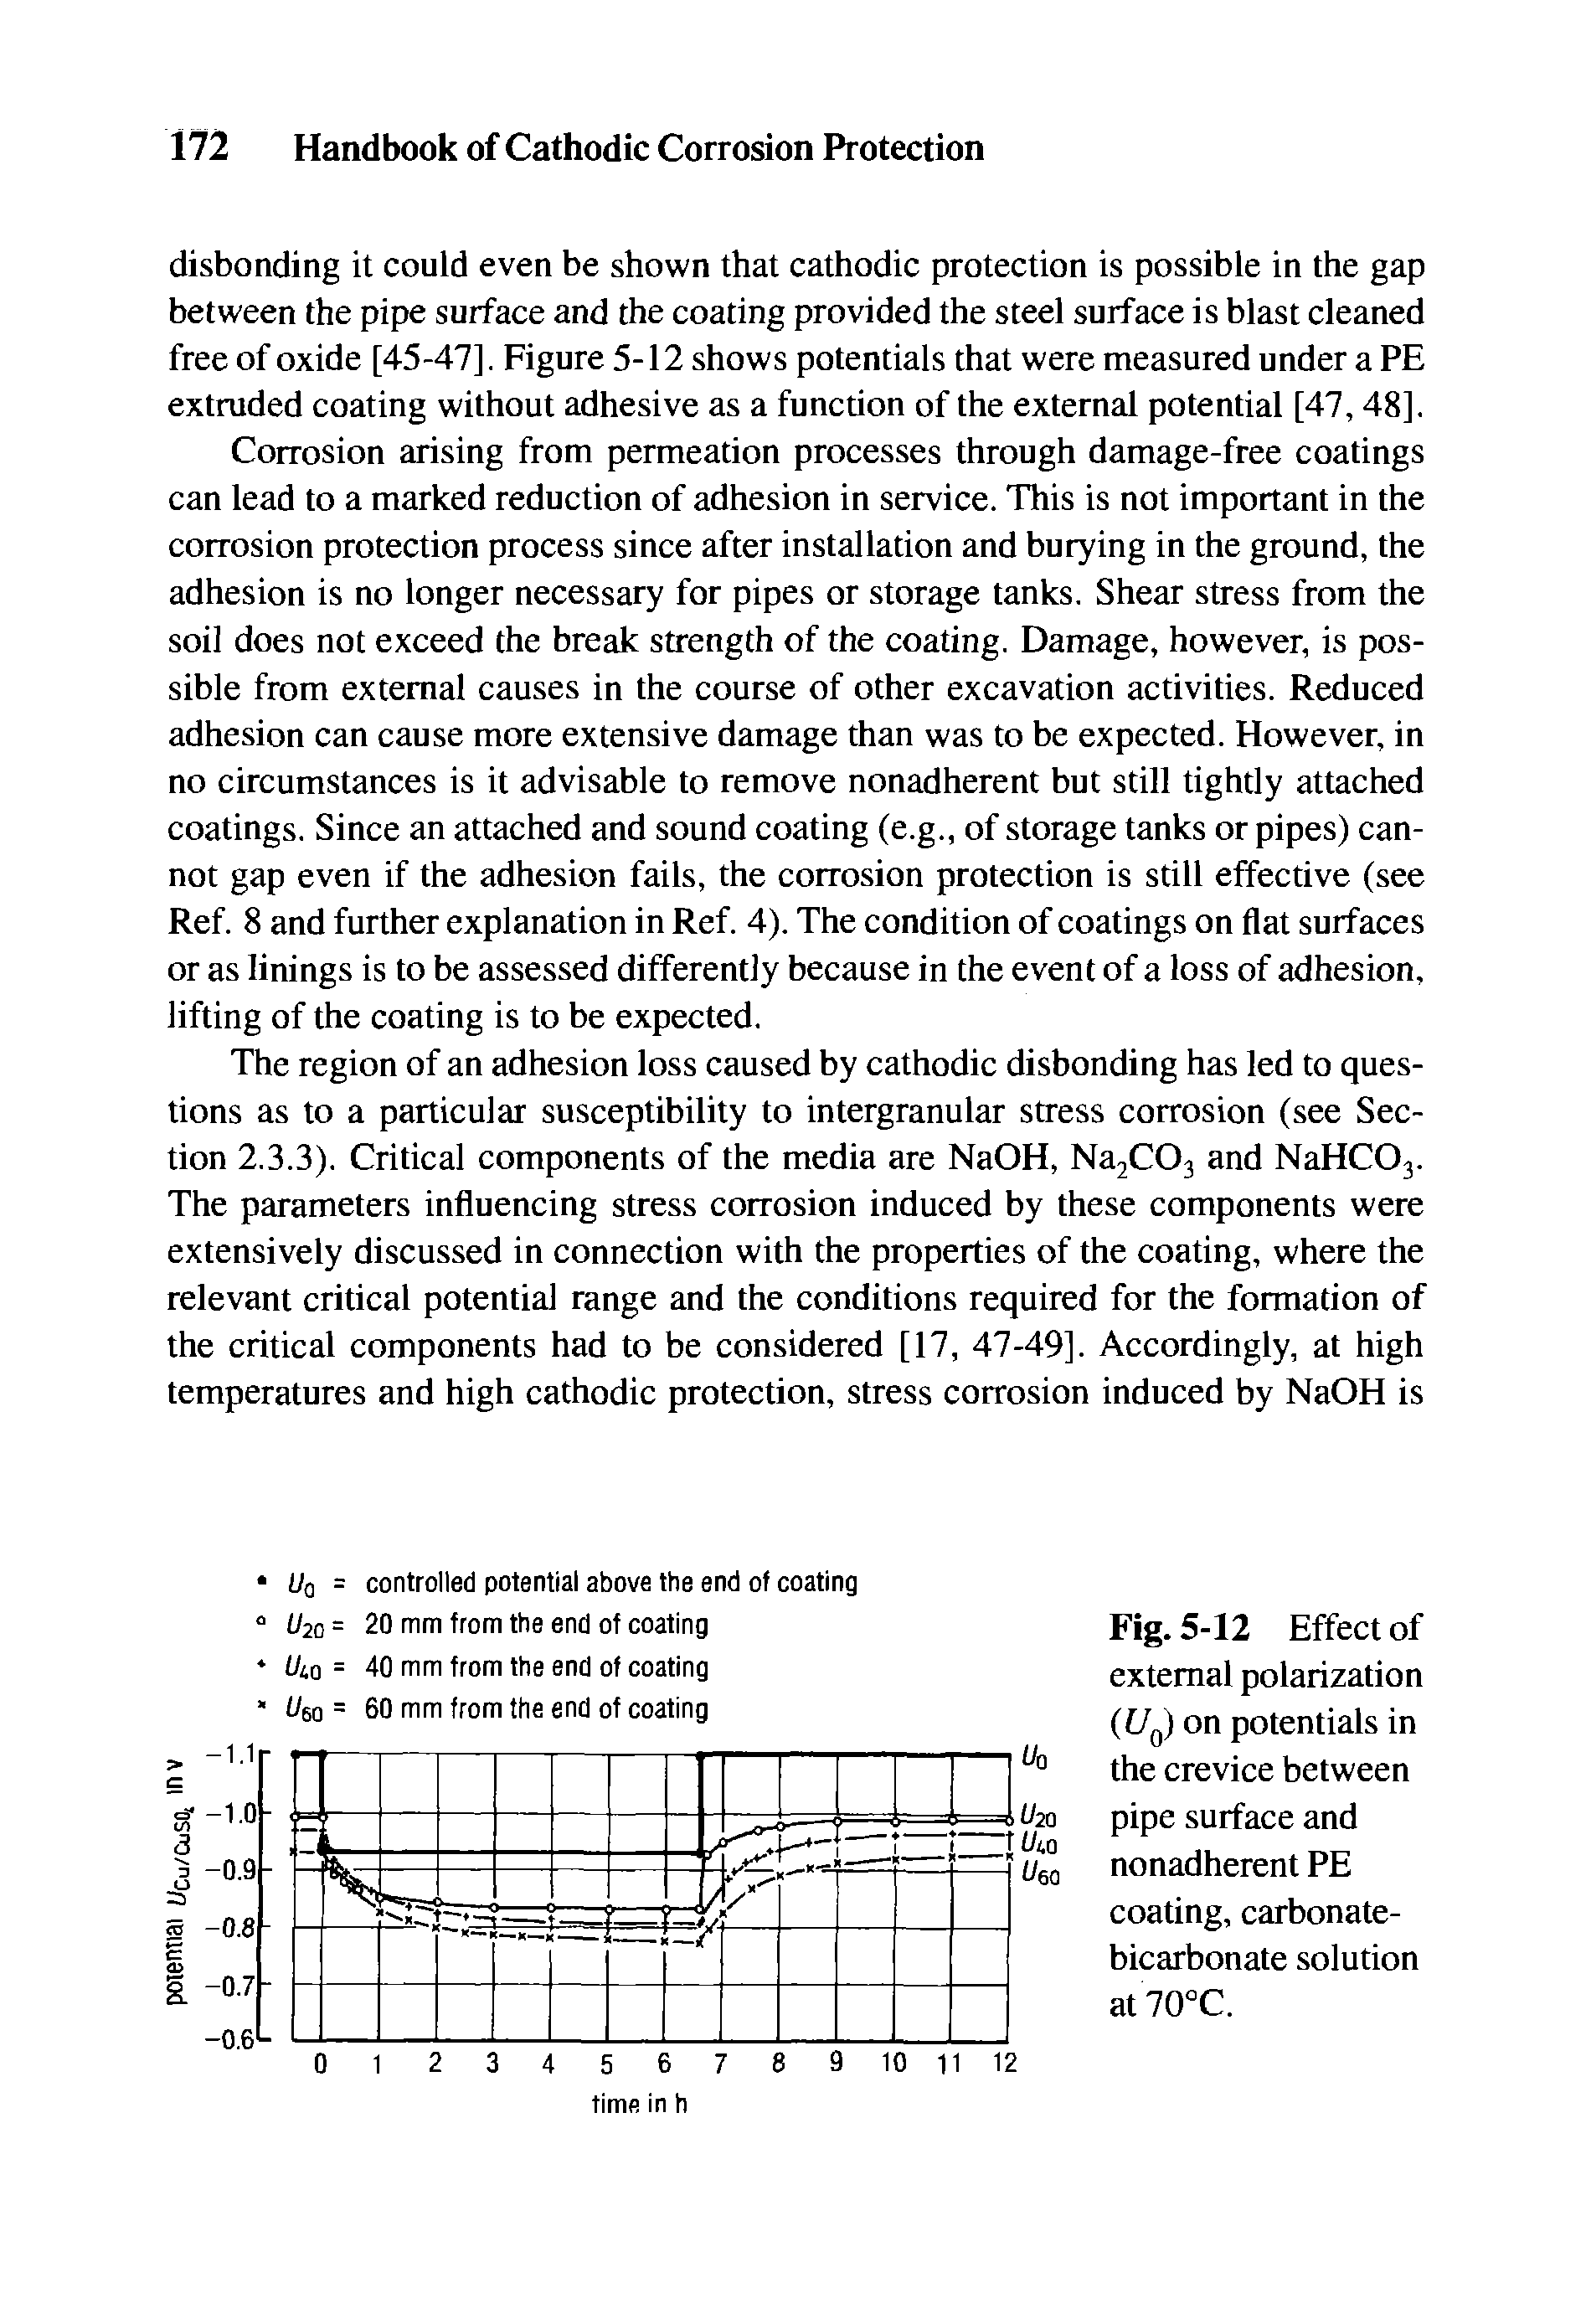 Fig. 5-12 Effect of external polarization (t/g) on potentials in the crevice between pipe surface and nonadherent PE coating, carbonate-bicarbonate solution at70 C.